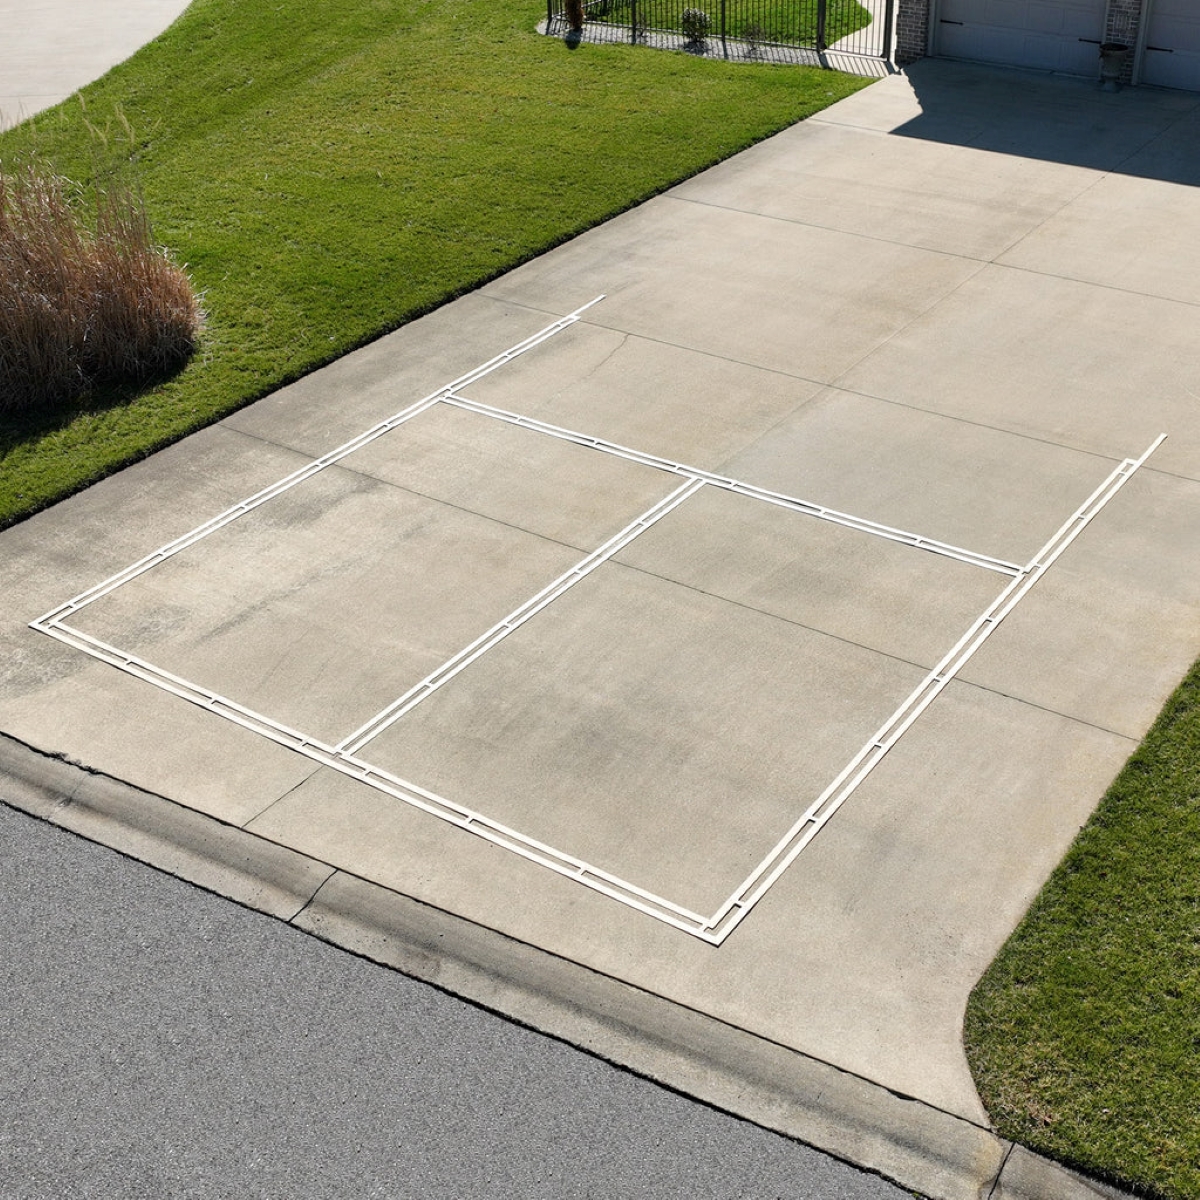 Pickleball court stencil is laid out on the driveway.